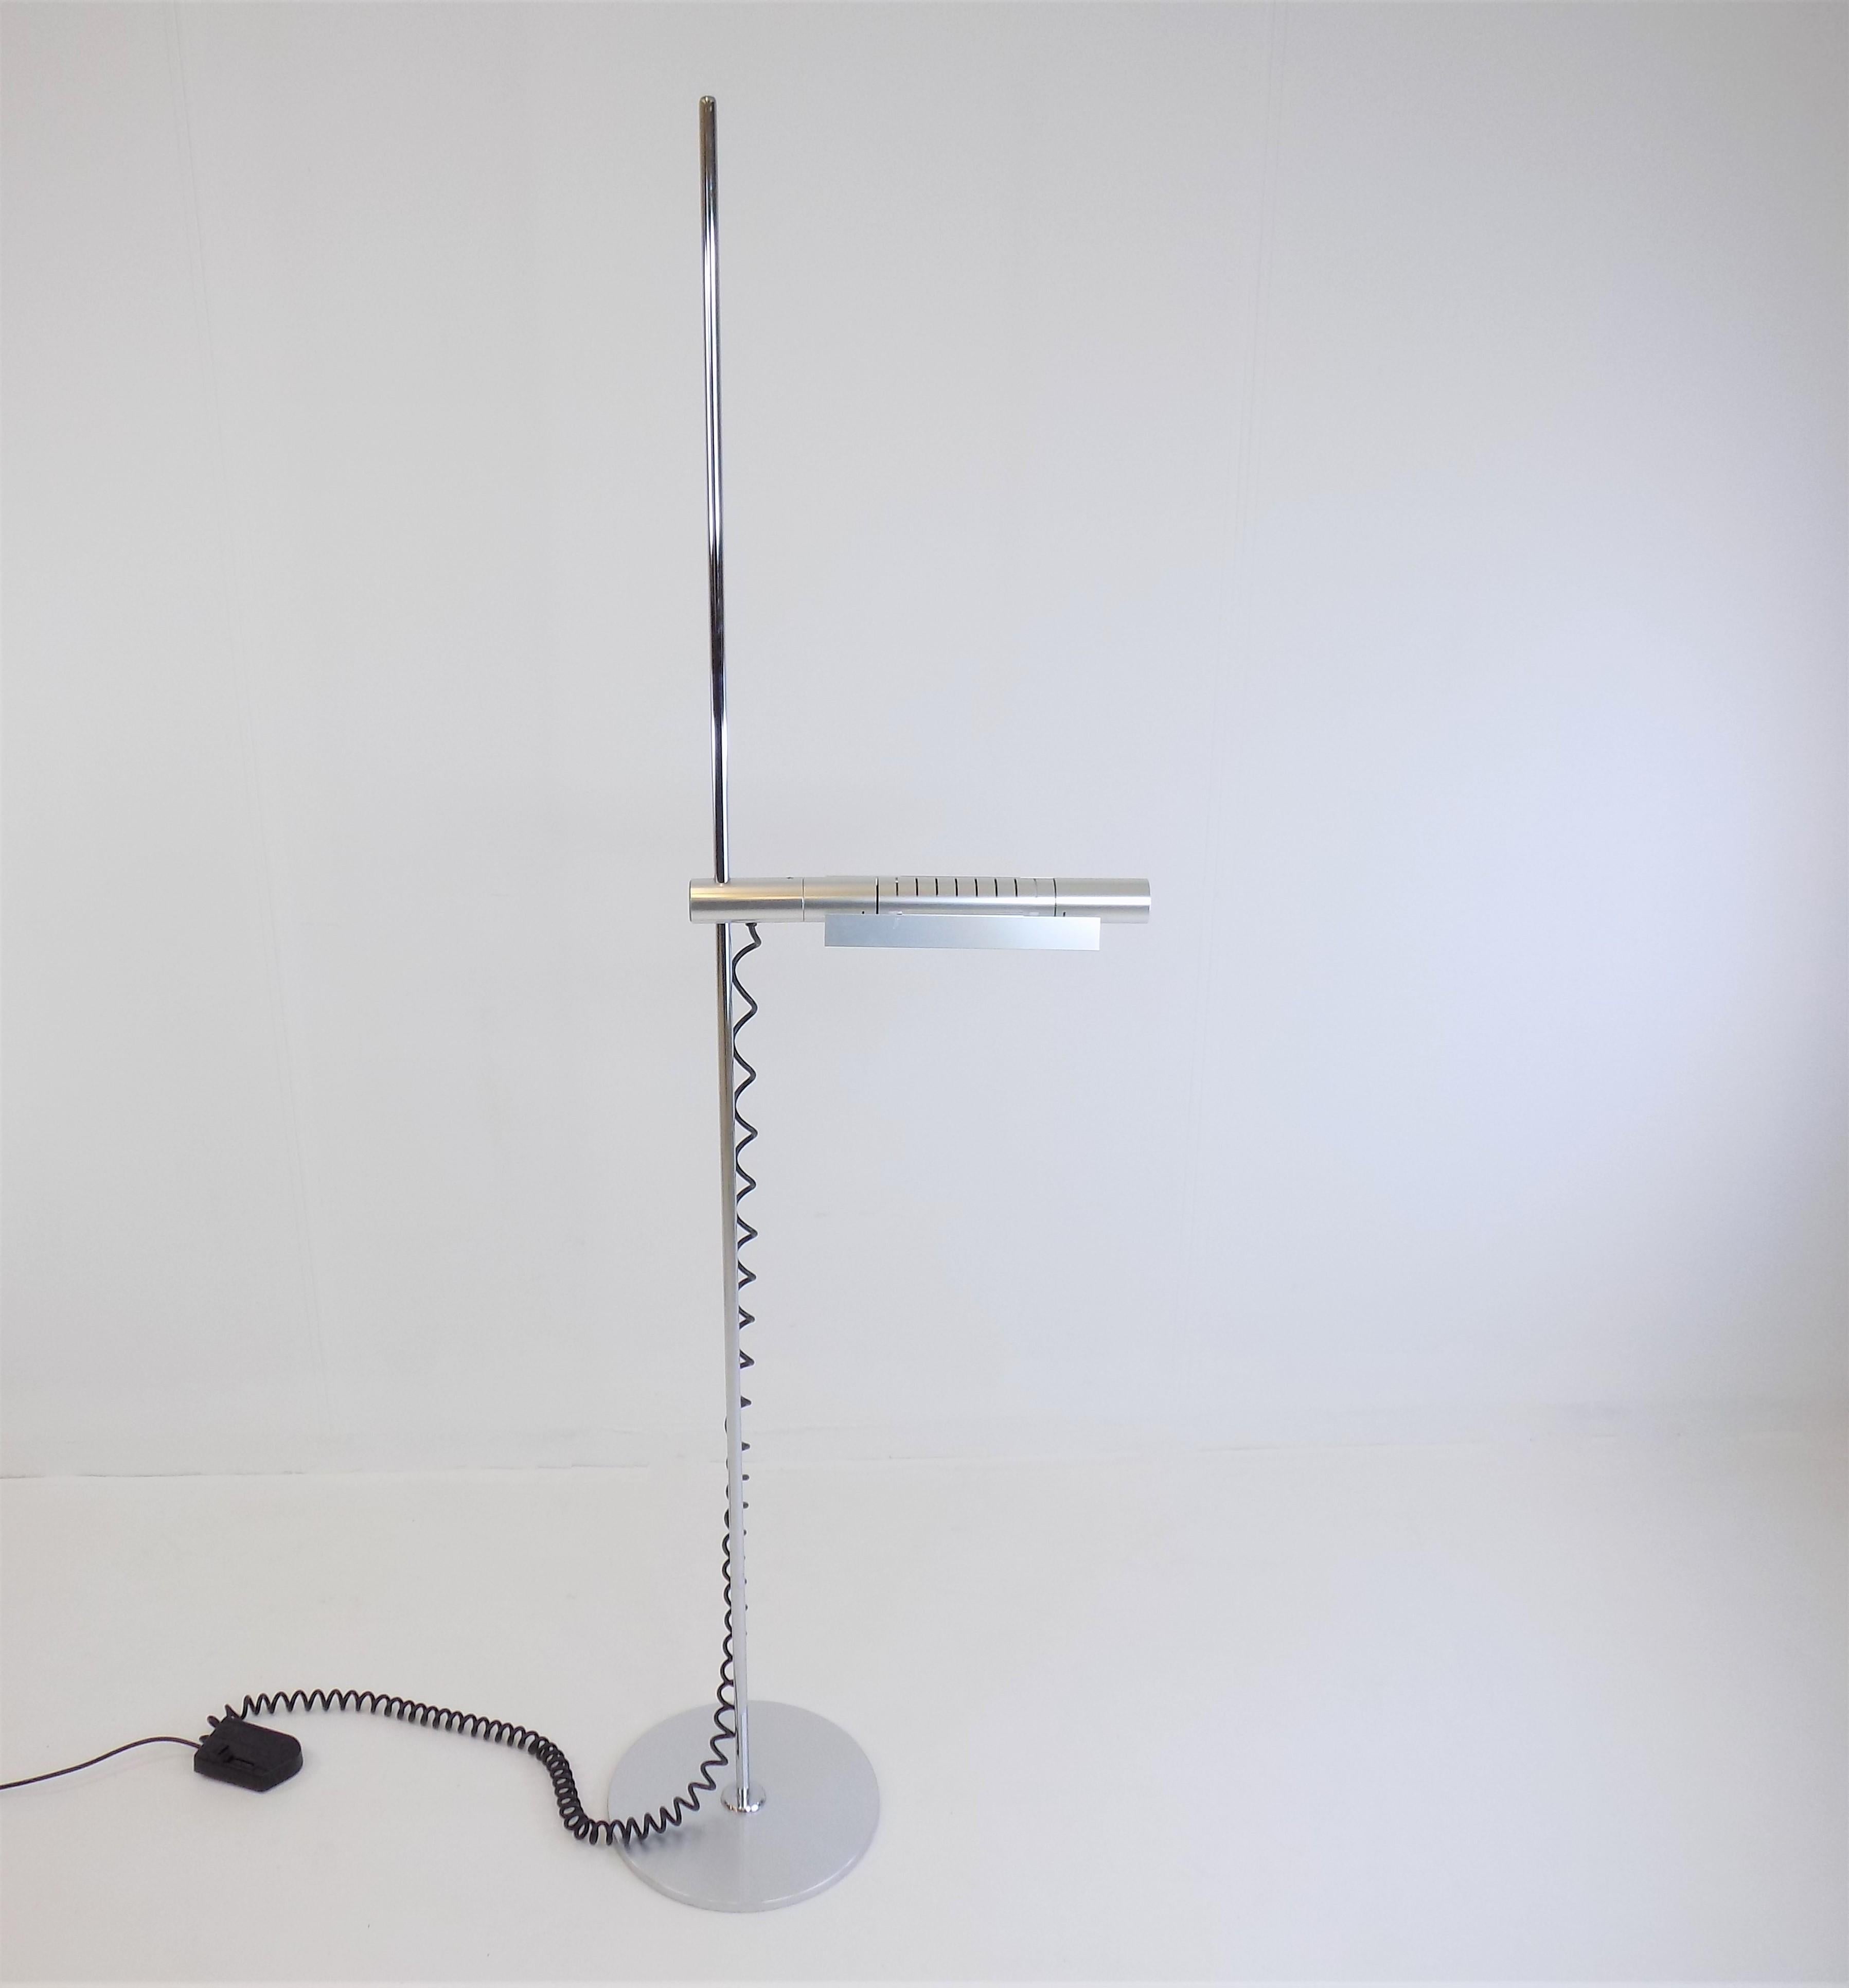 This Halo floor lamp from Swisslamps, in brushed stainless steel, is in excellent condition. The lamp can be used in a variety of ways thanks to its 176 cm high rod and the lamp head rotating around the axis. This means that the lamp can be used as